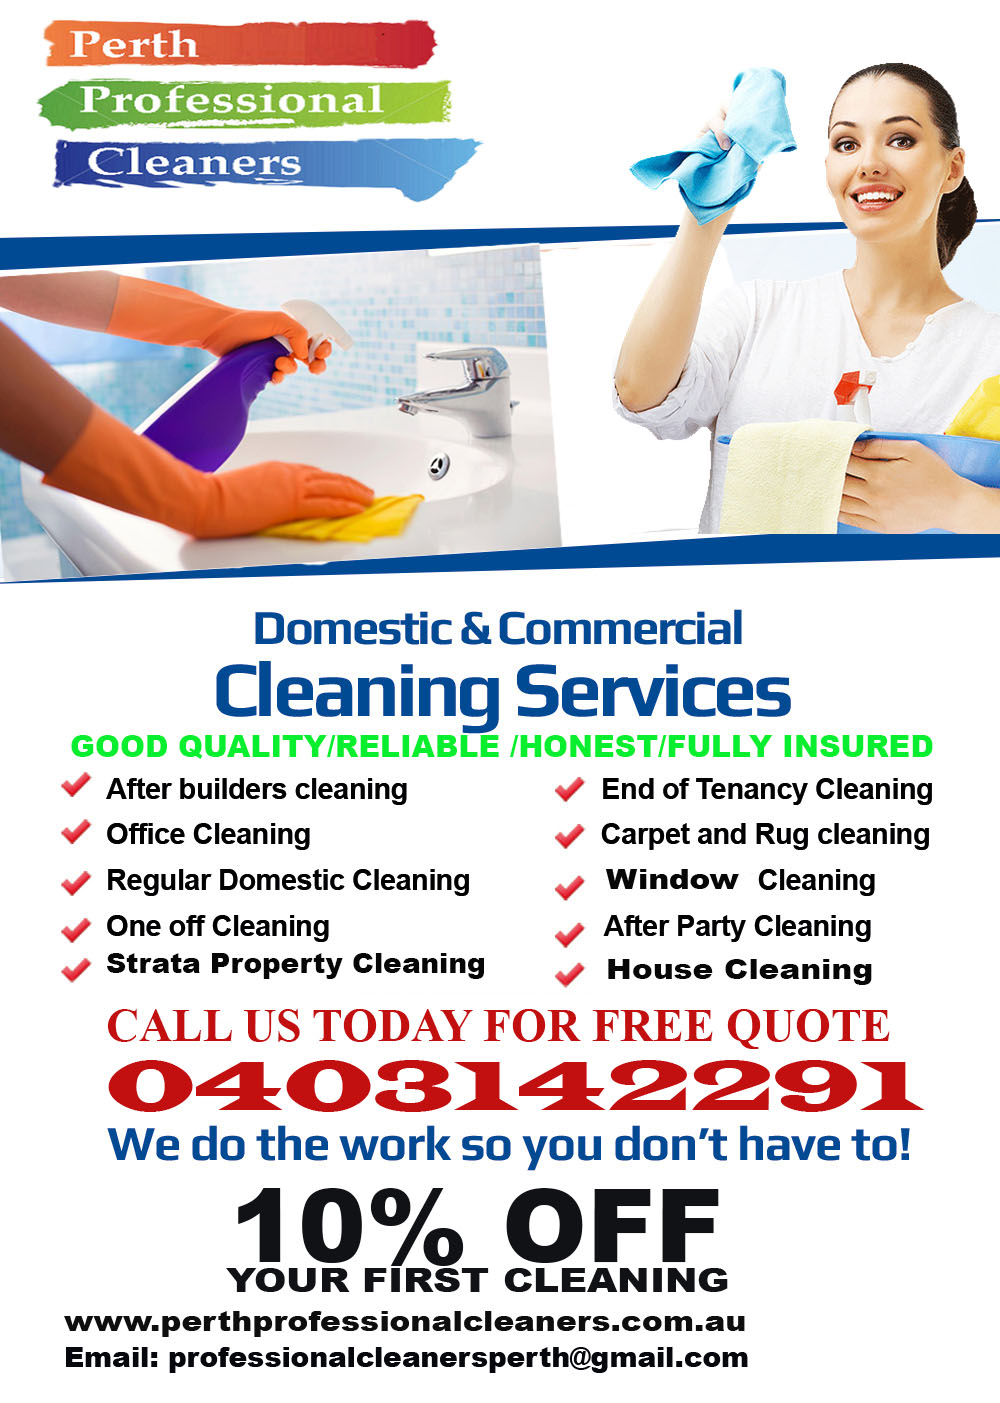 Best cleaning service in perth Perth Professional Cleaners